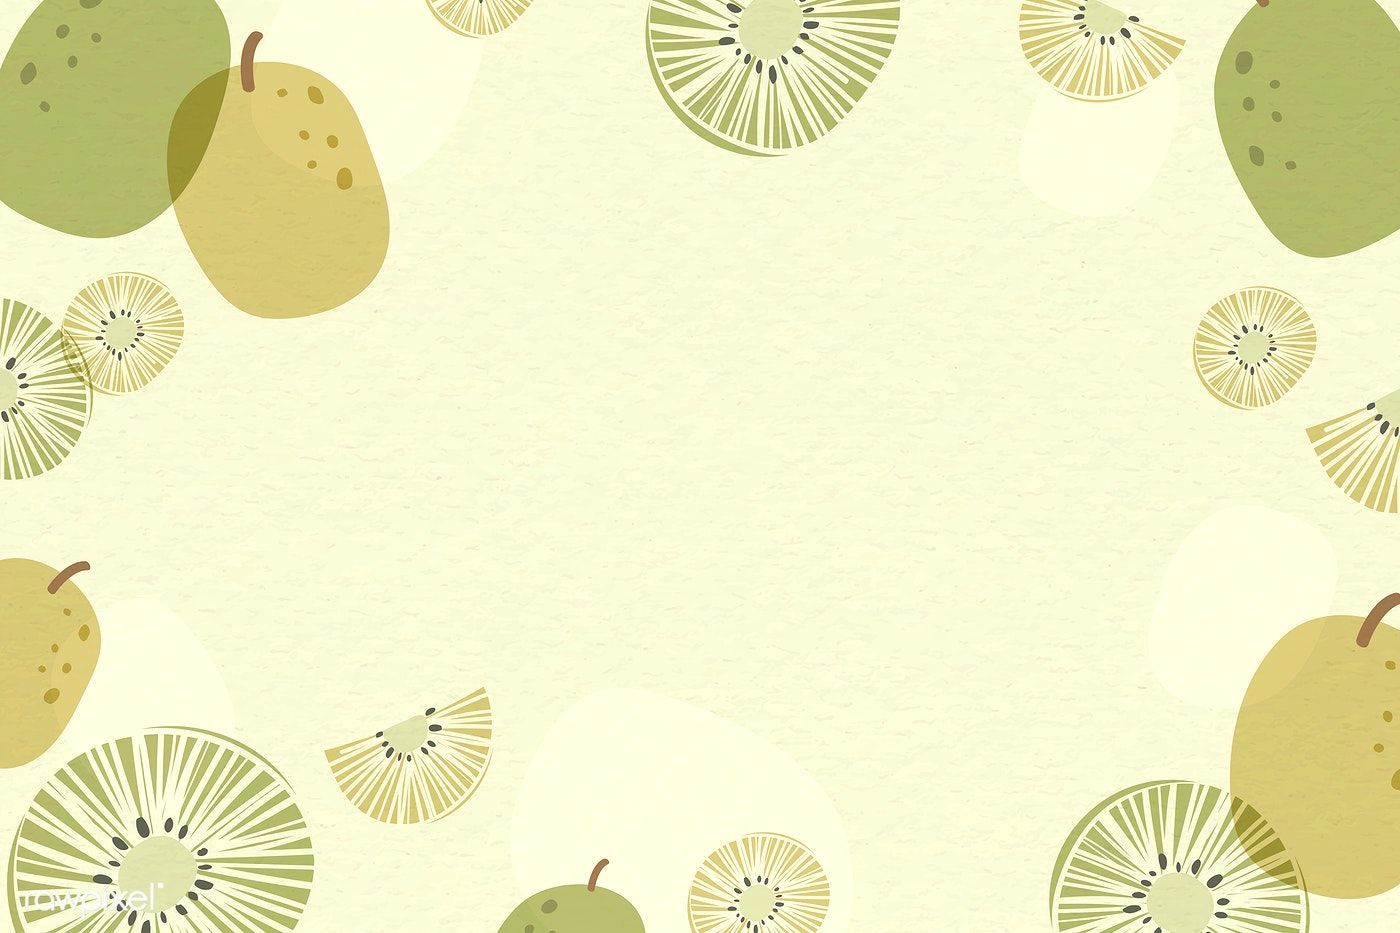 Kiwi patterned background with design space vector / wan. Artsy background, Poster background design, Graphic poster art. Do not mention downloads or free downloads - Kiwi